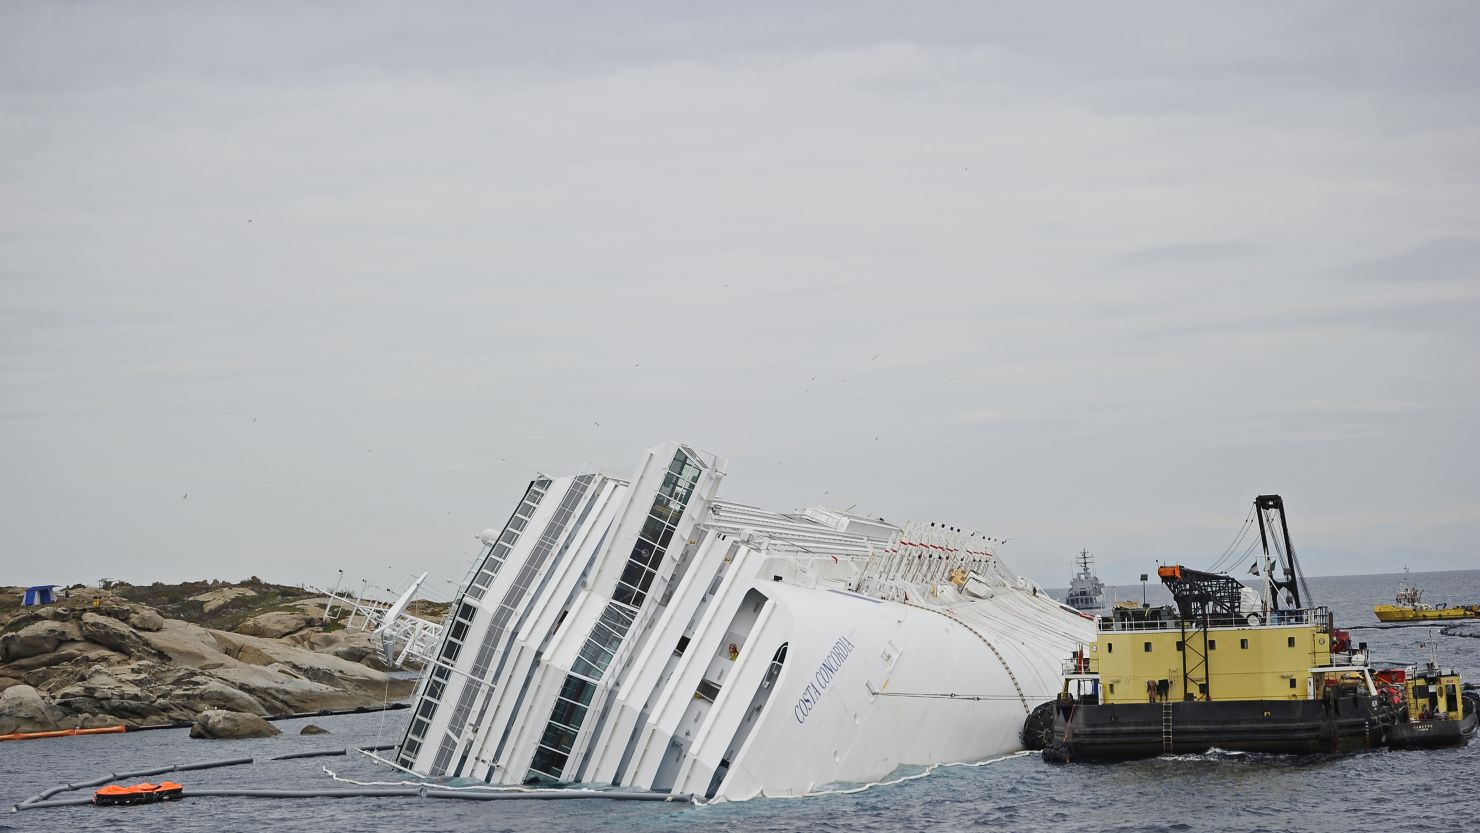 Twenty-five people are confirmed dead and seven are still missing after the Costa Concordia disaster.